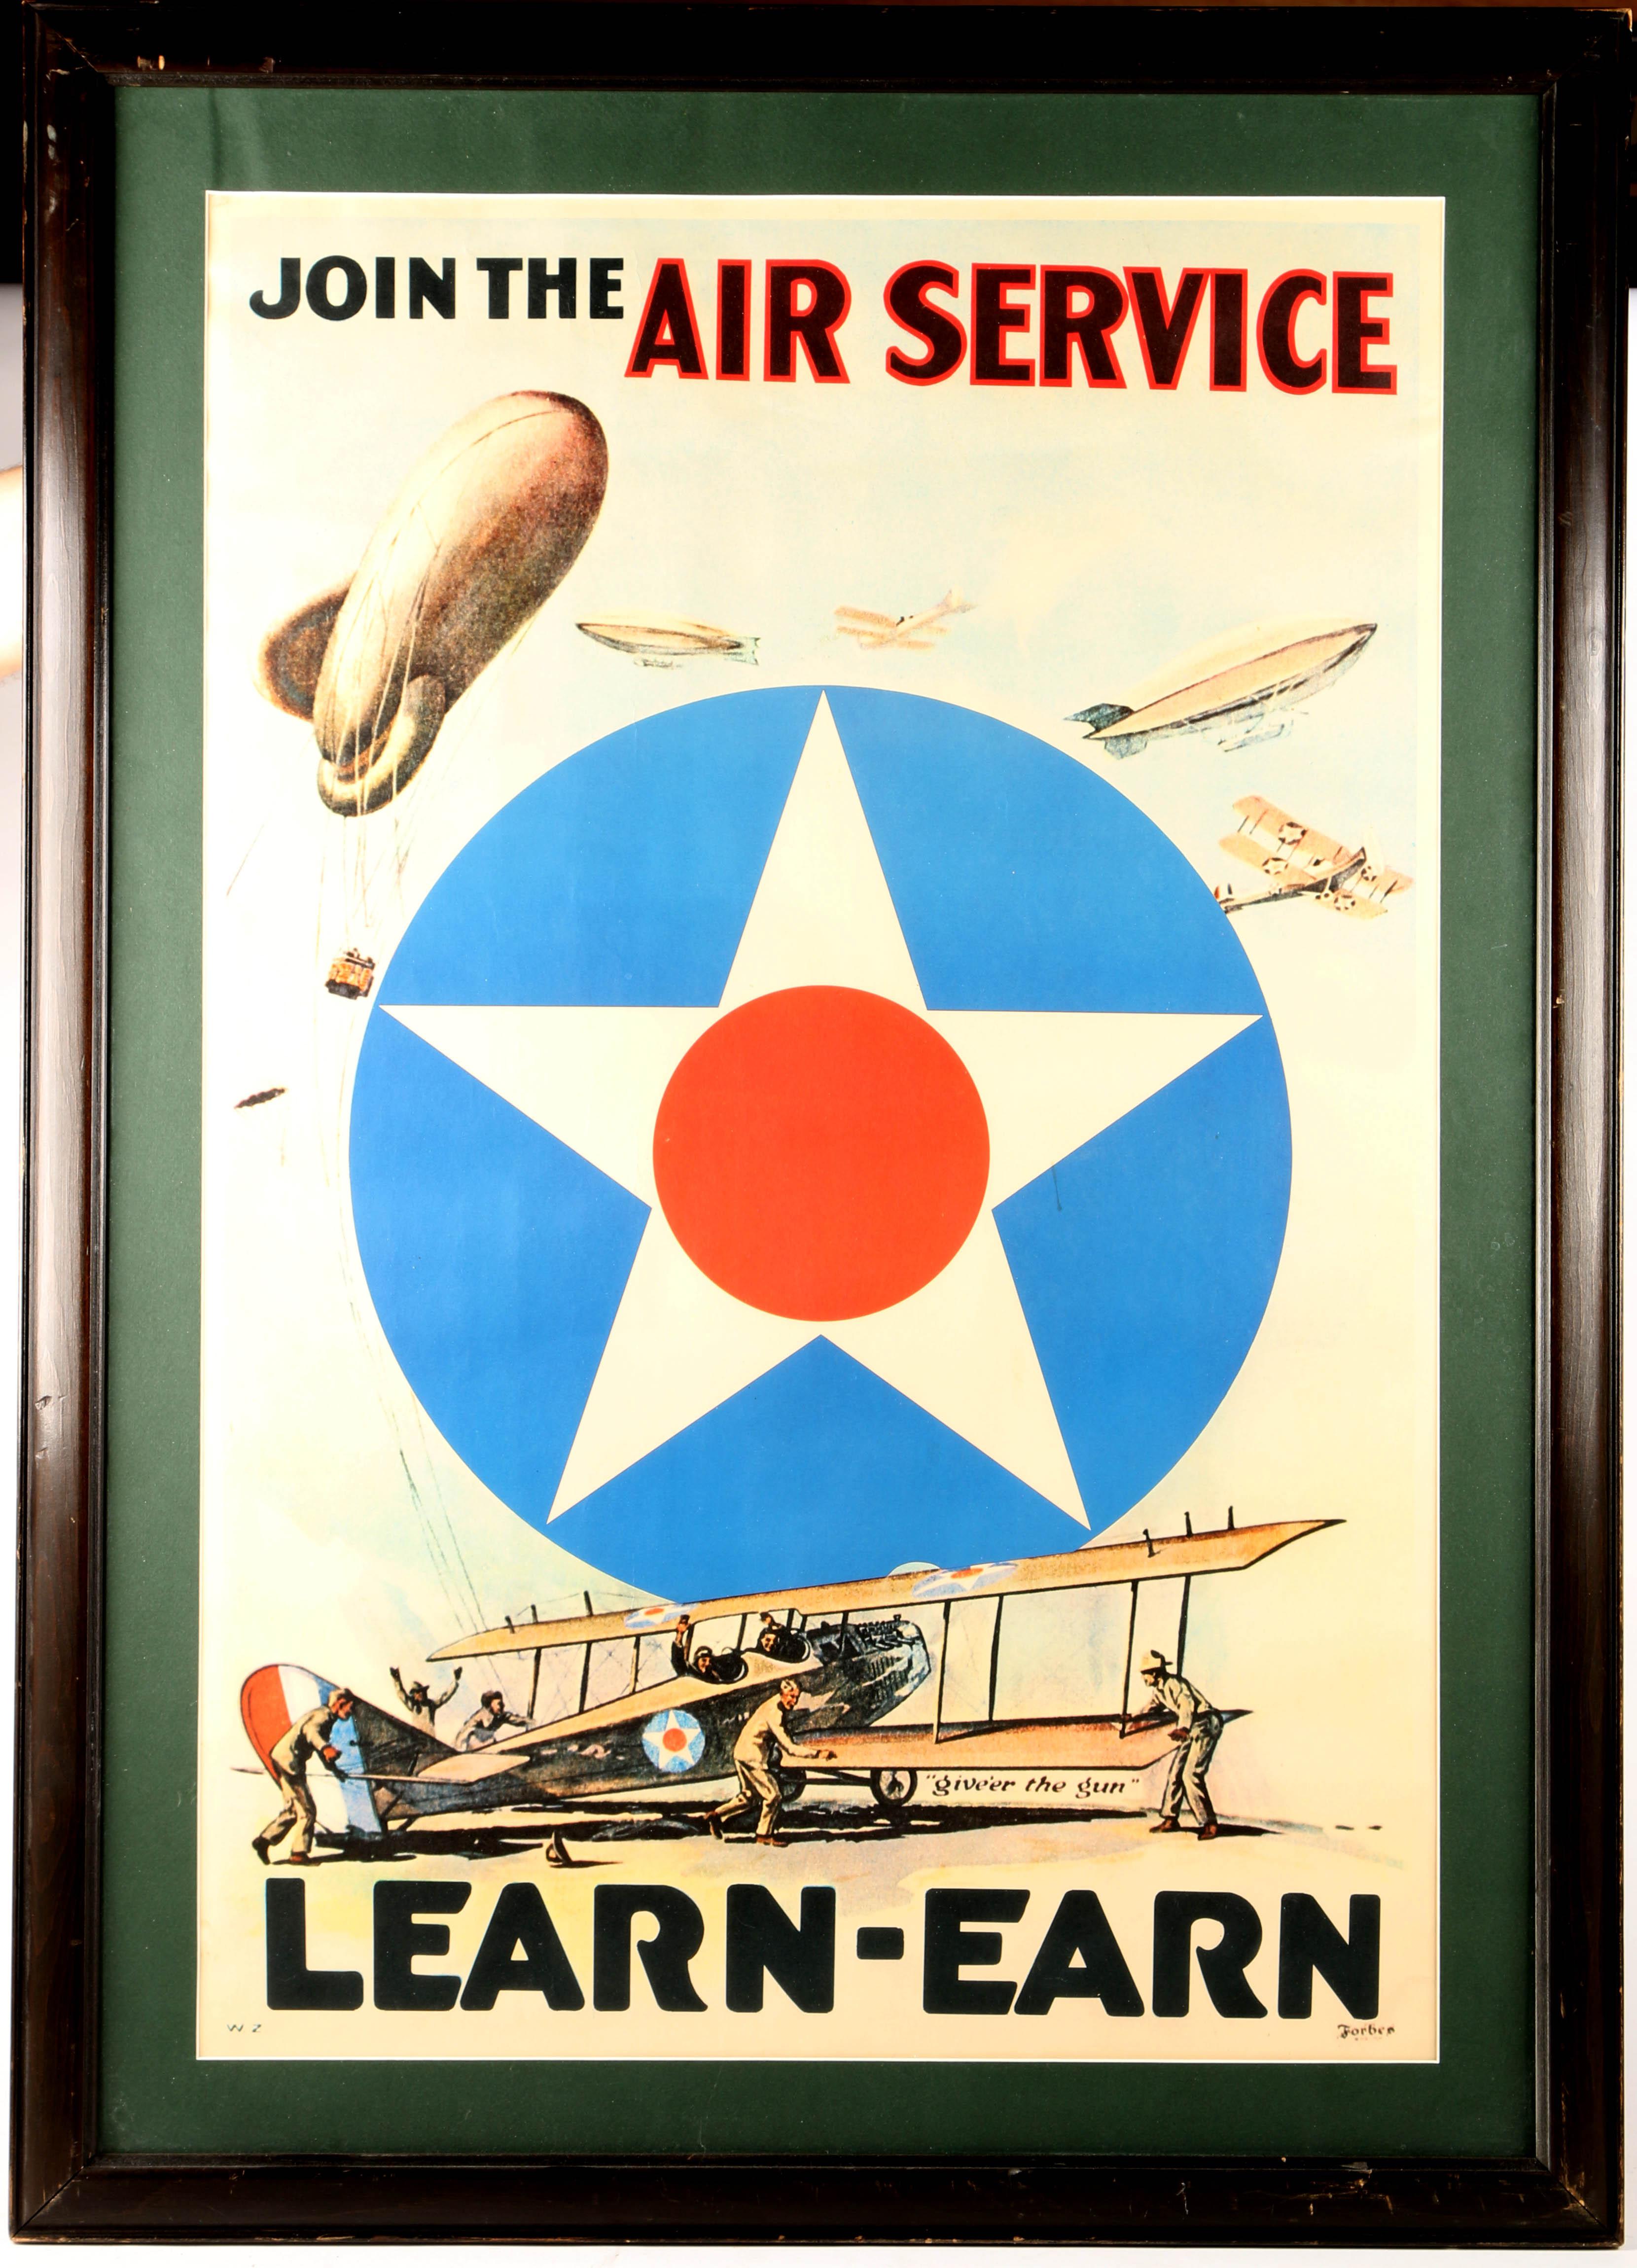 WWI lithograph poster "Join the Air Service Learn-Earn ("Give'er the Gun")"